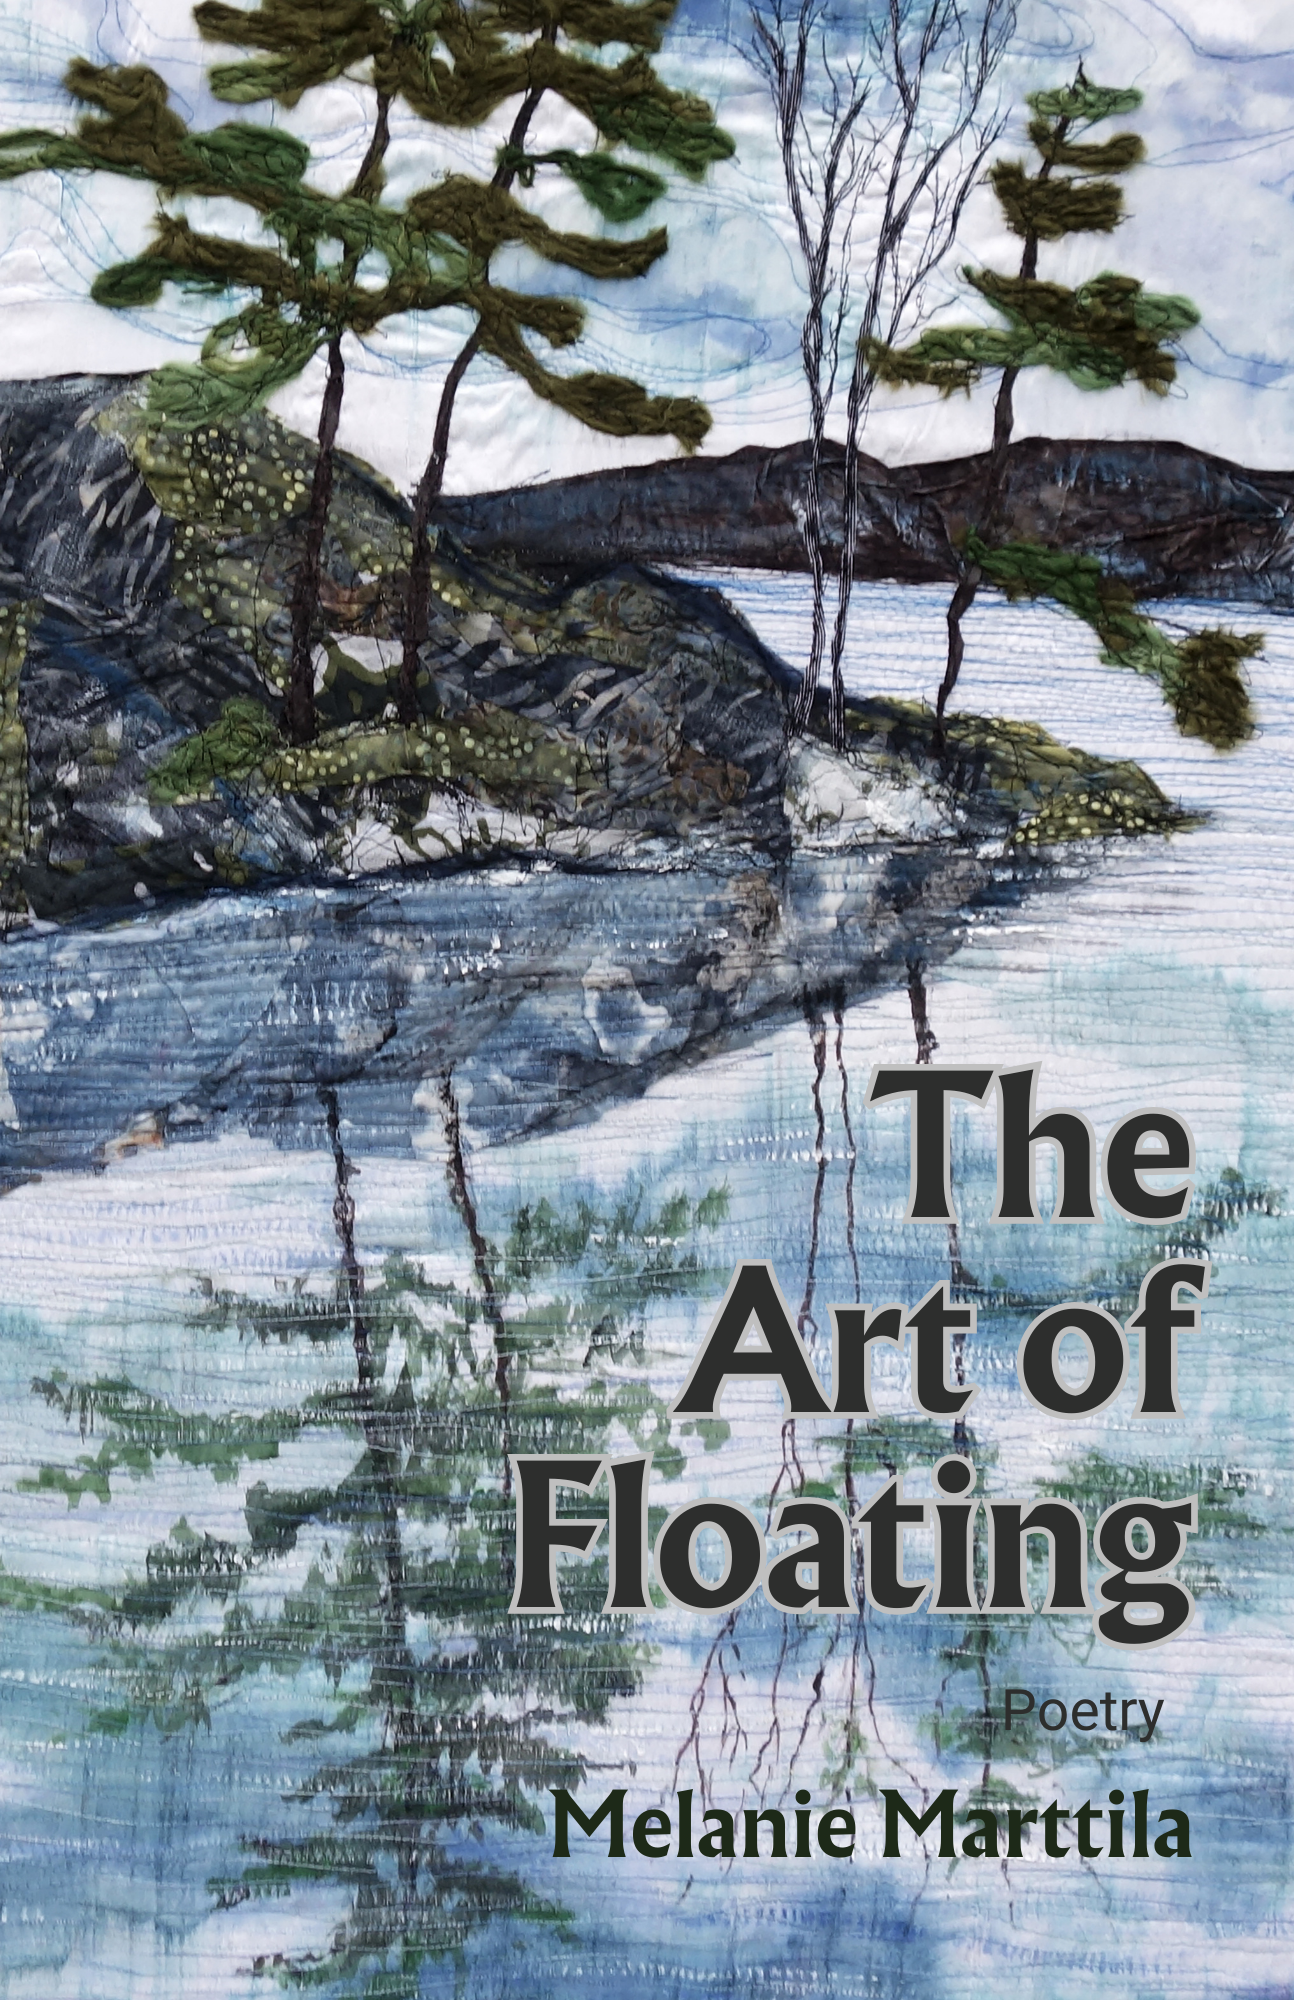 The cover of The Art of Floating by Melanie Marttila.